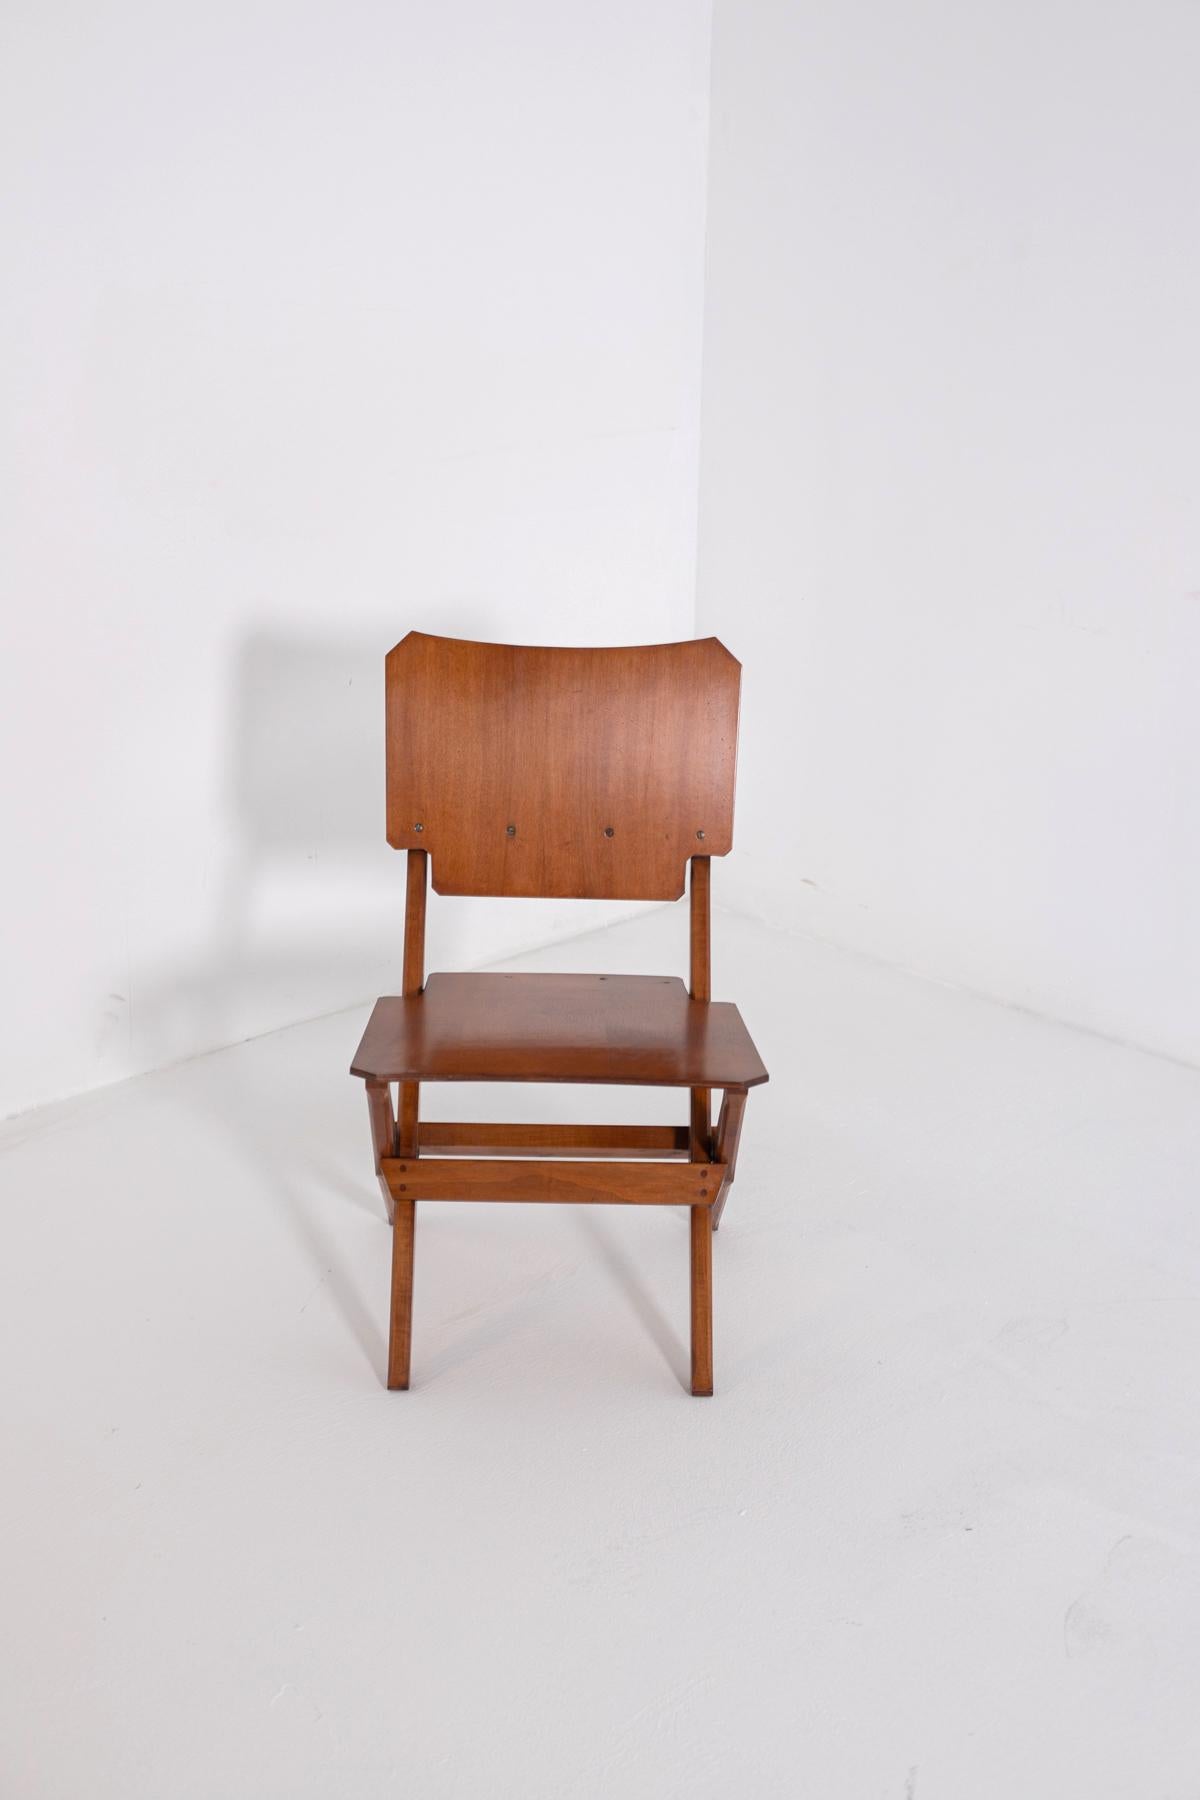 Franco Albini Pair of Vintage Wooden Chairs for Poggi 1